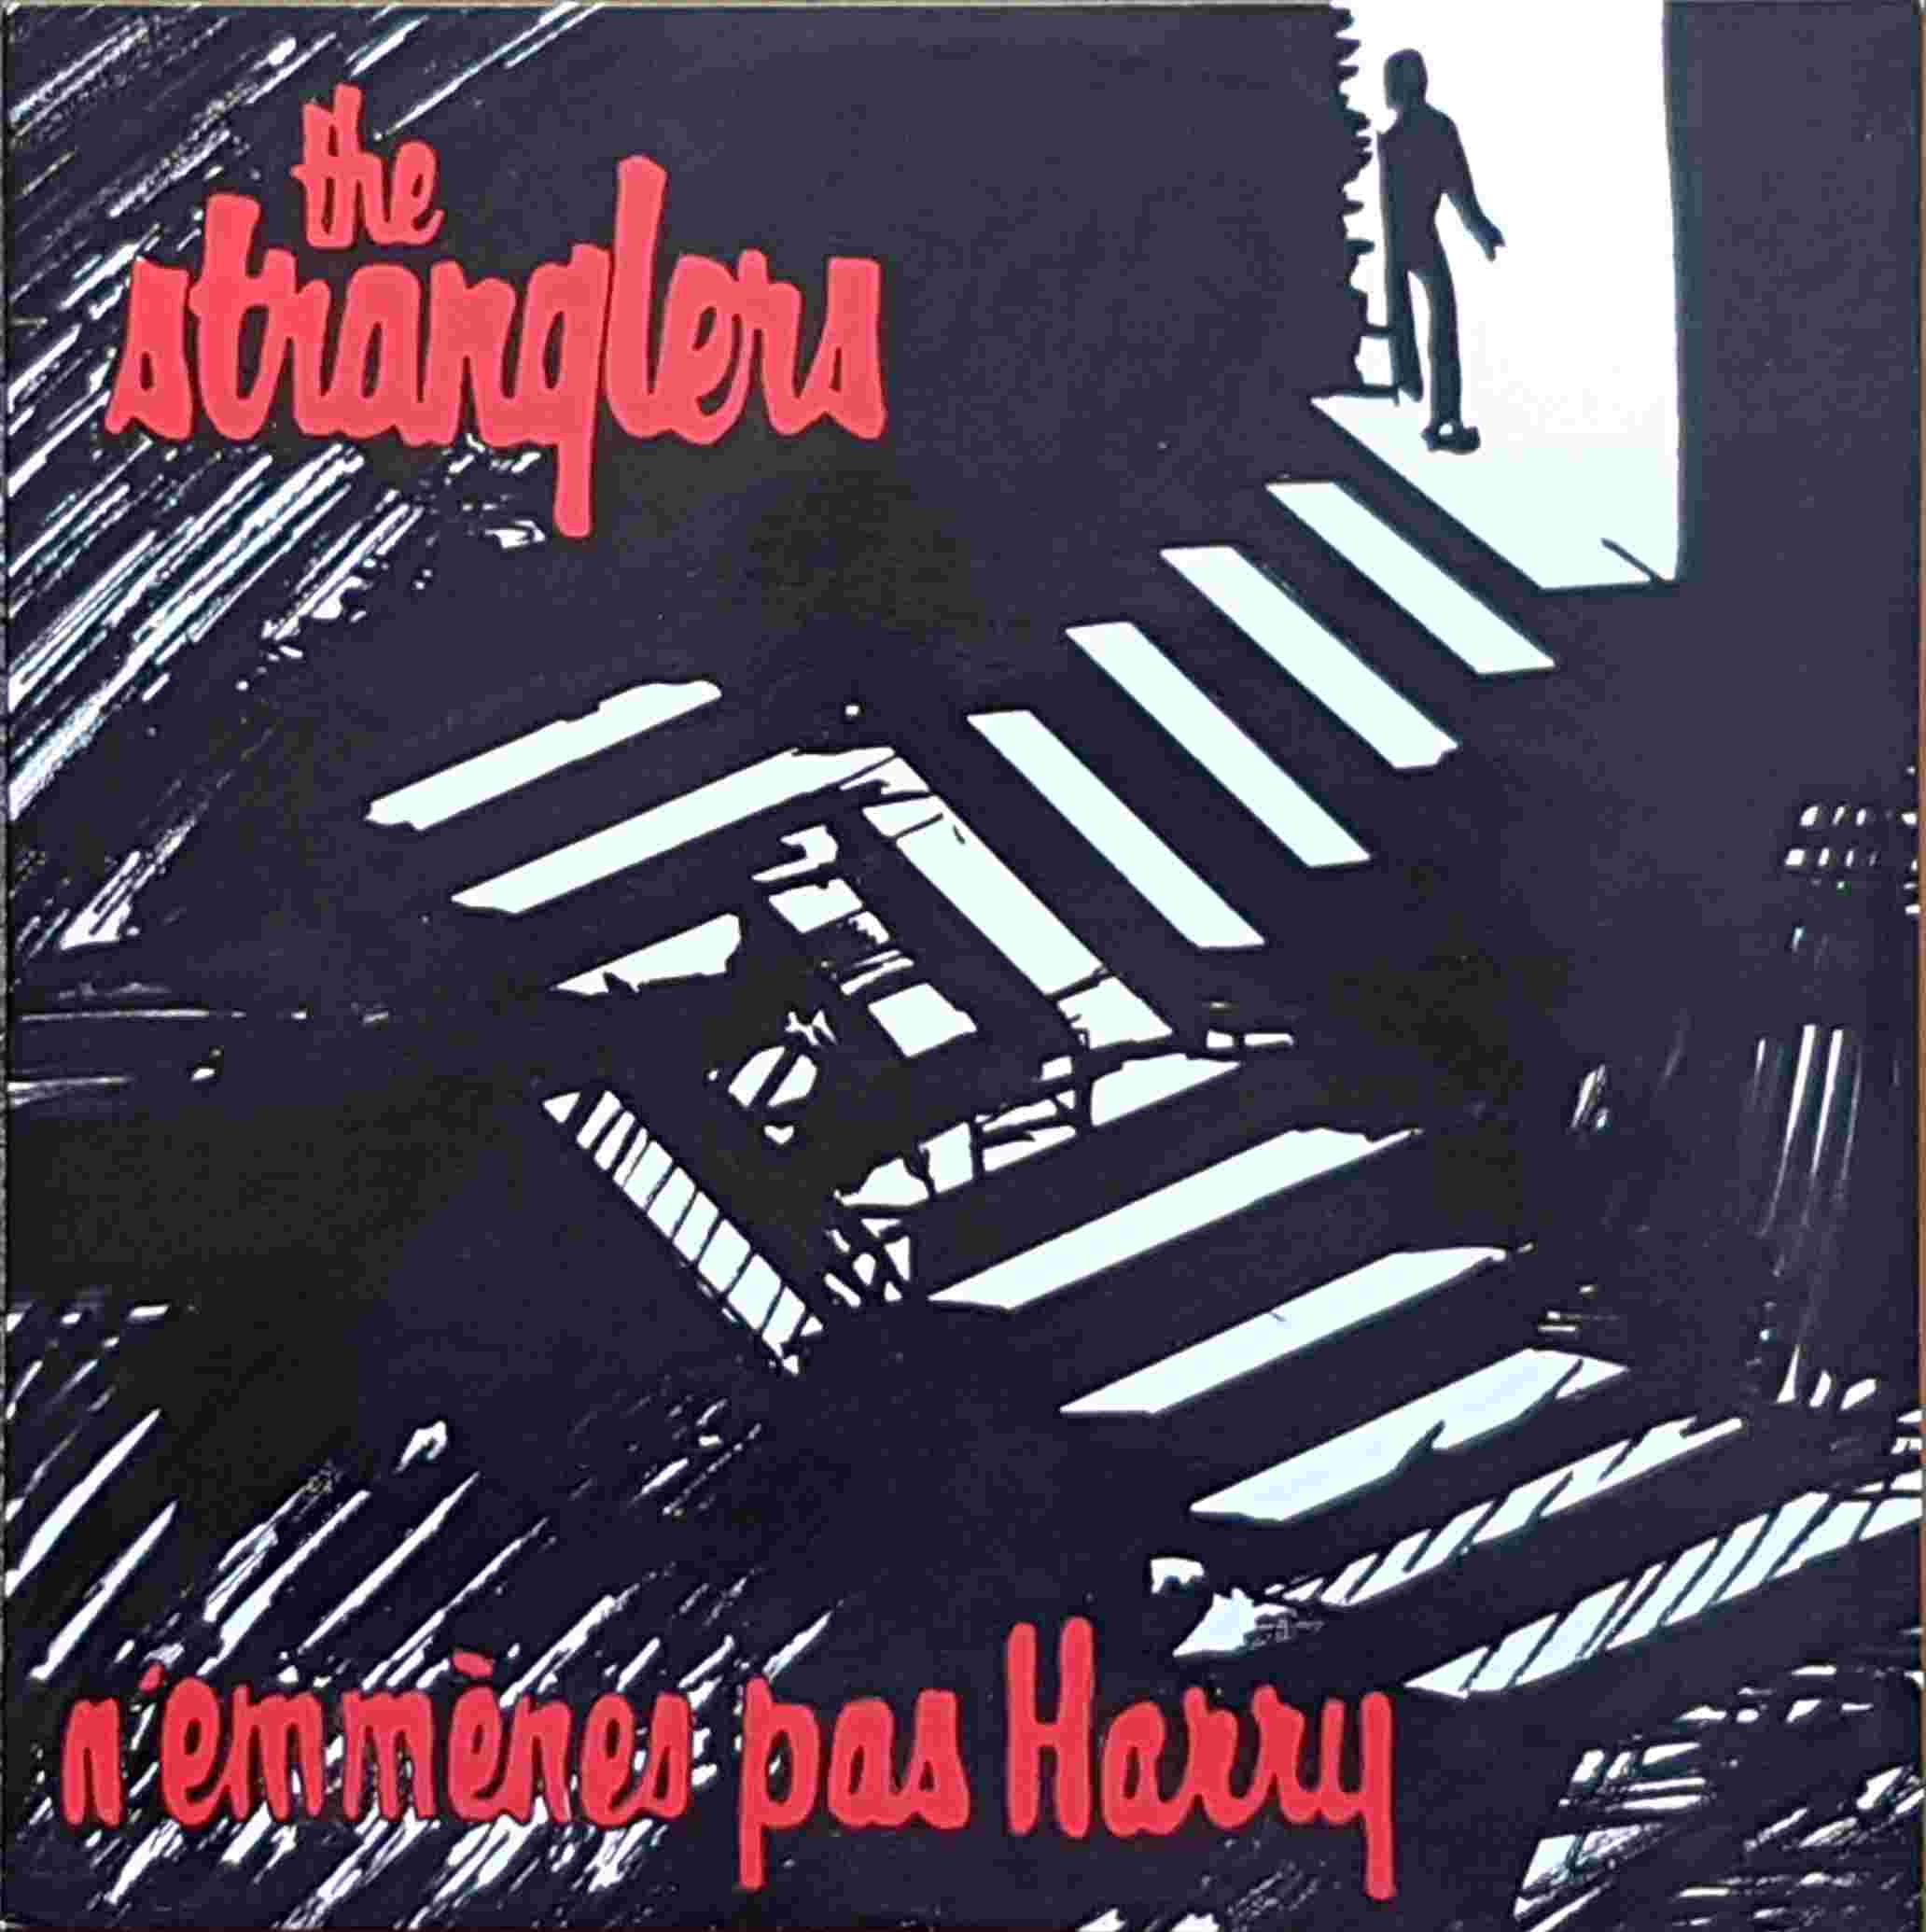 Picture of HARRY 1 N'emmenes pas Harry by artist The Stranglers  from The Stranglers